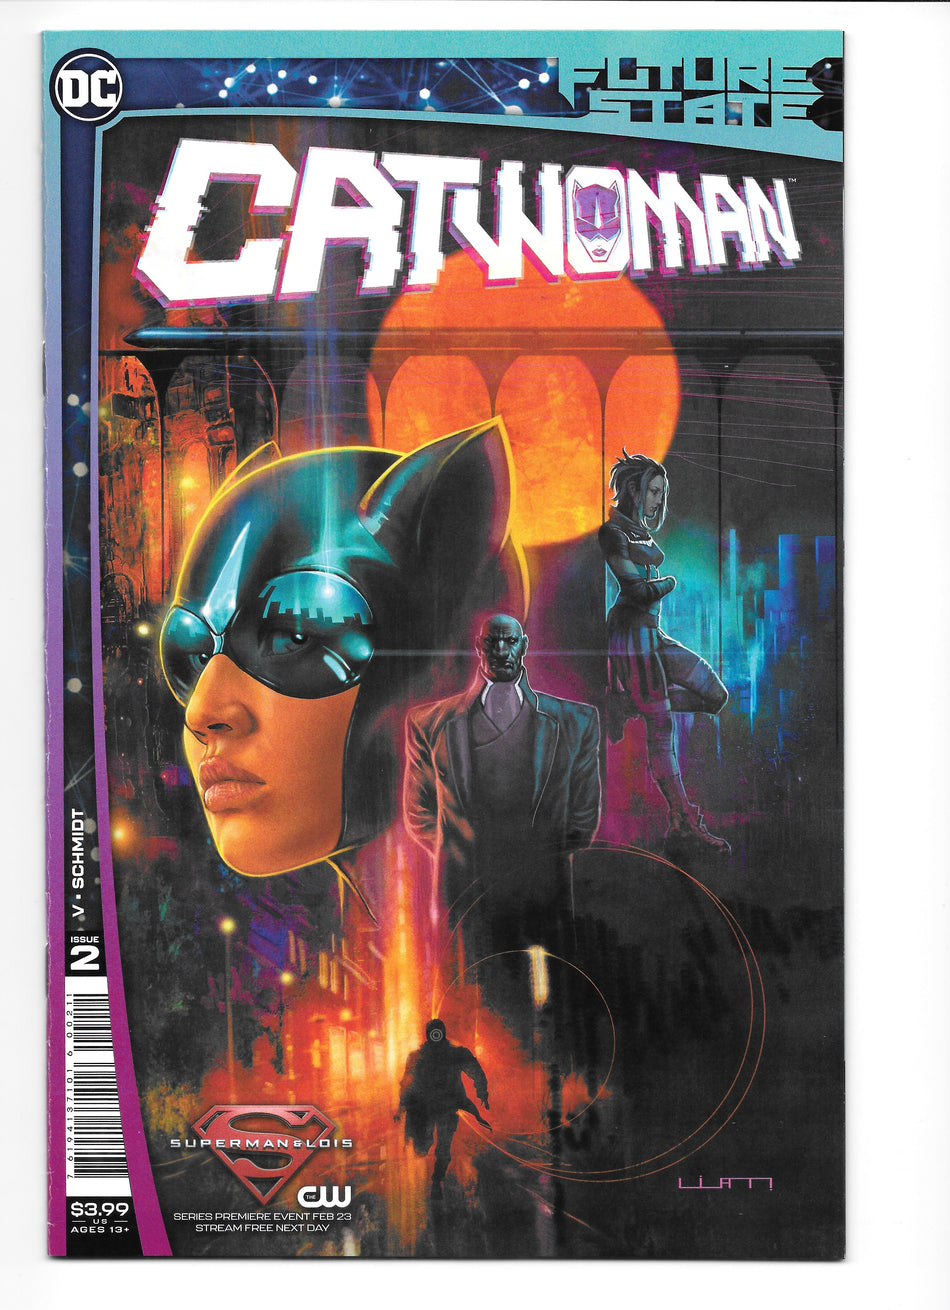 Photo of Future State Catwoman Issue 2 comic sold by Stronghold Collectibles